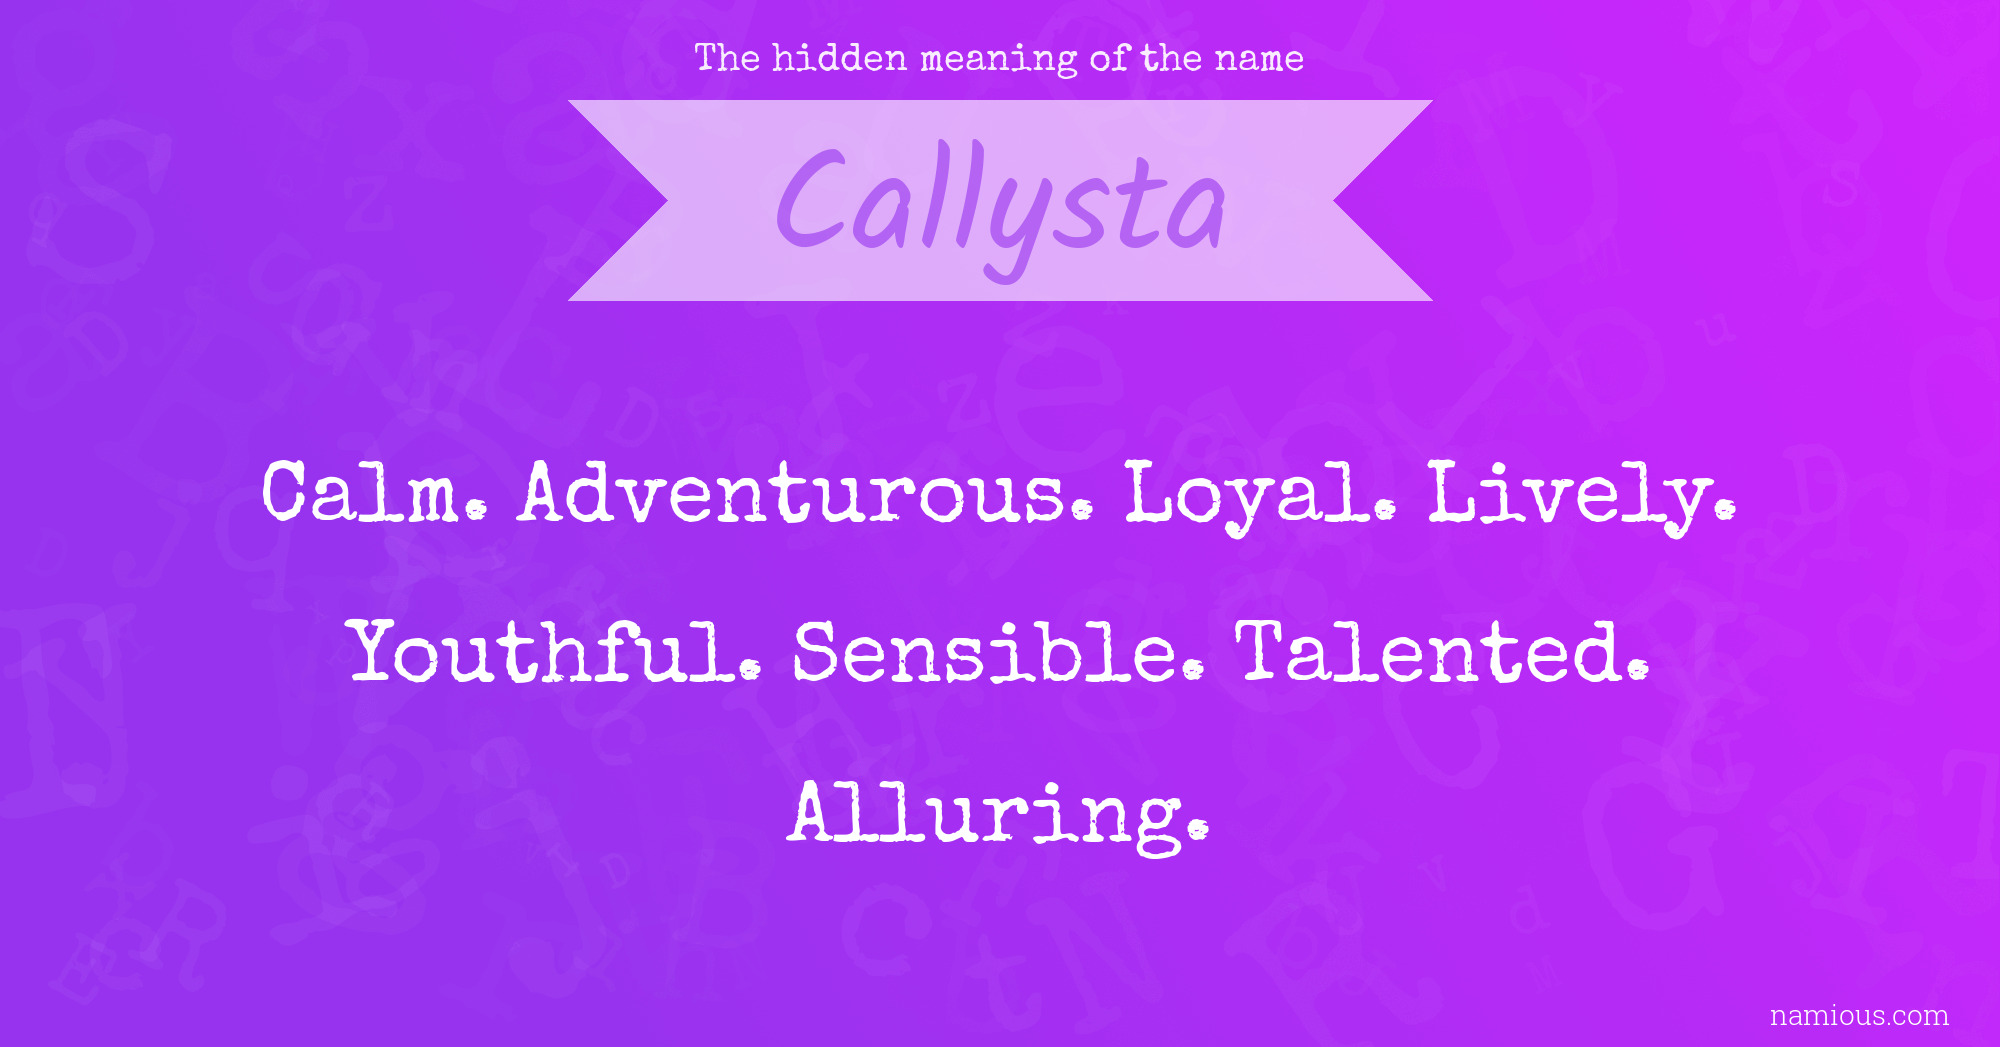 The hidden meaning of the name Callysta